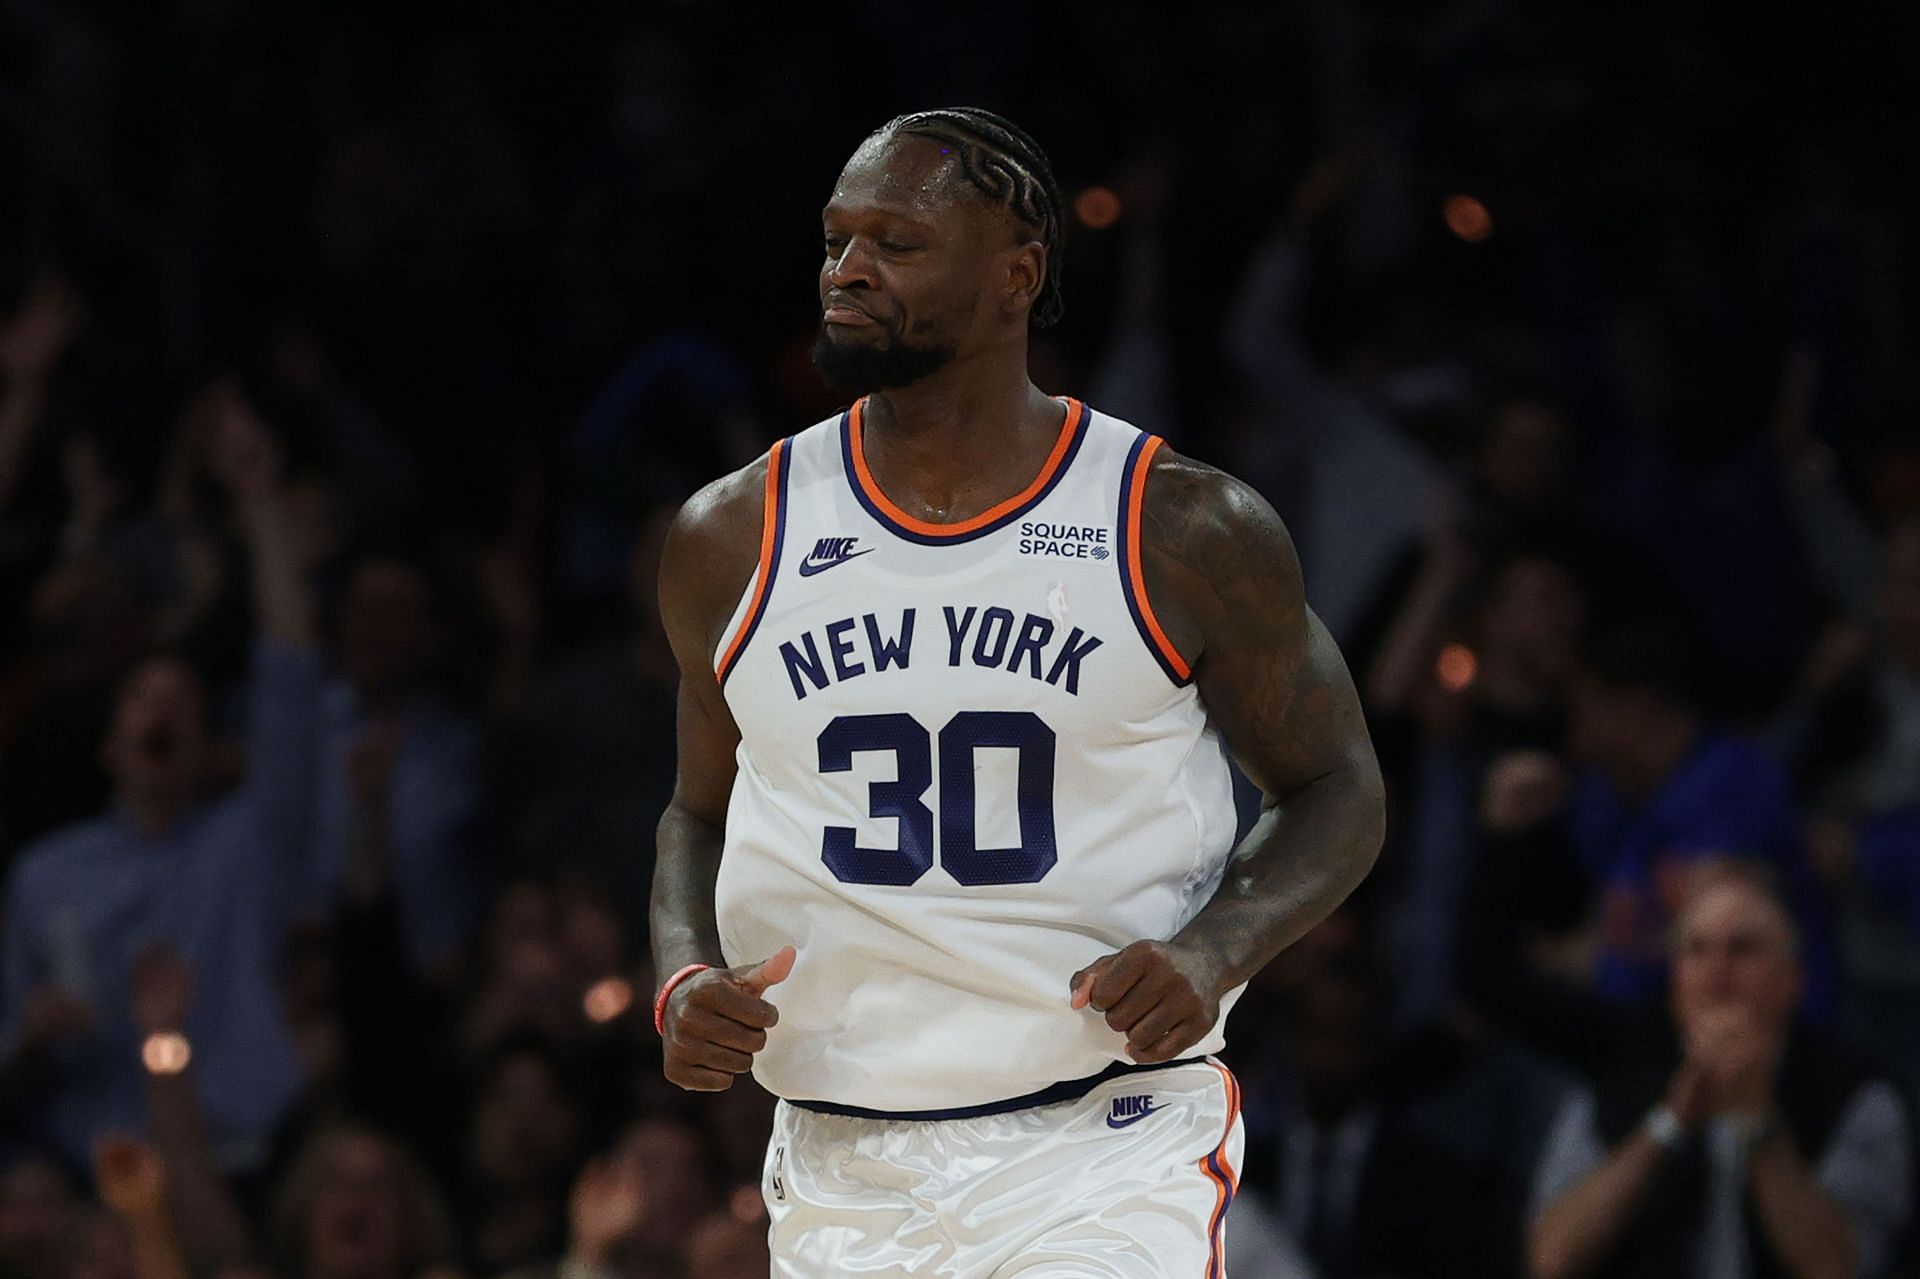 Julius Randle&#039;s ability to pass out of double teams and off the dribble is an invaluable part of the New York Knicks&#039; offense.